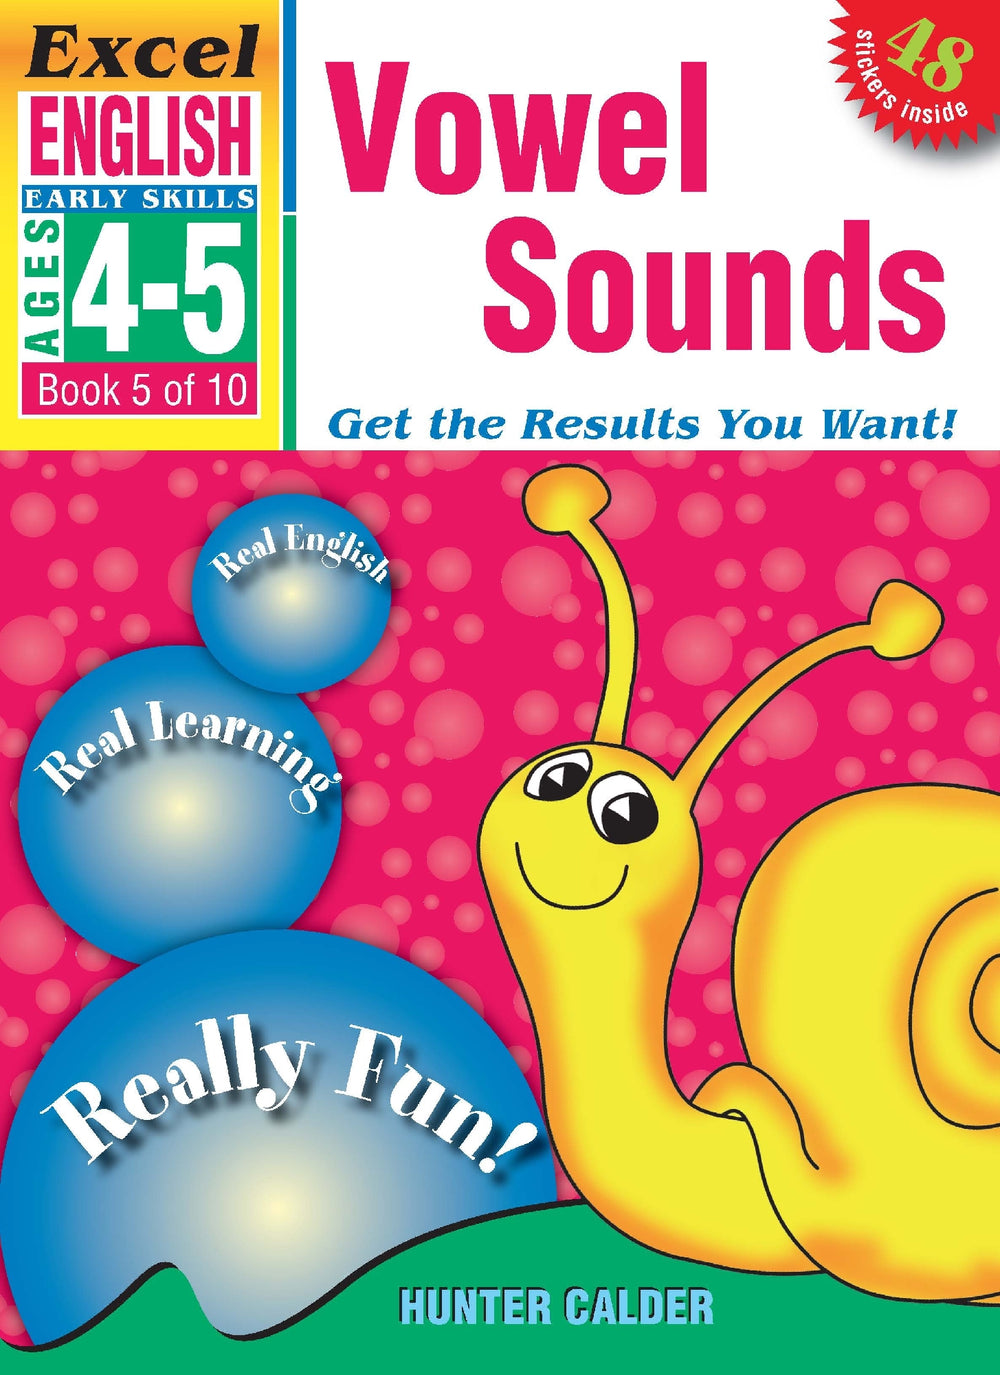 Excel Early Skills English Book 5: Vowel Sounds Ages 4-5